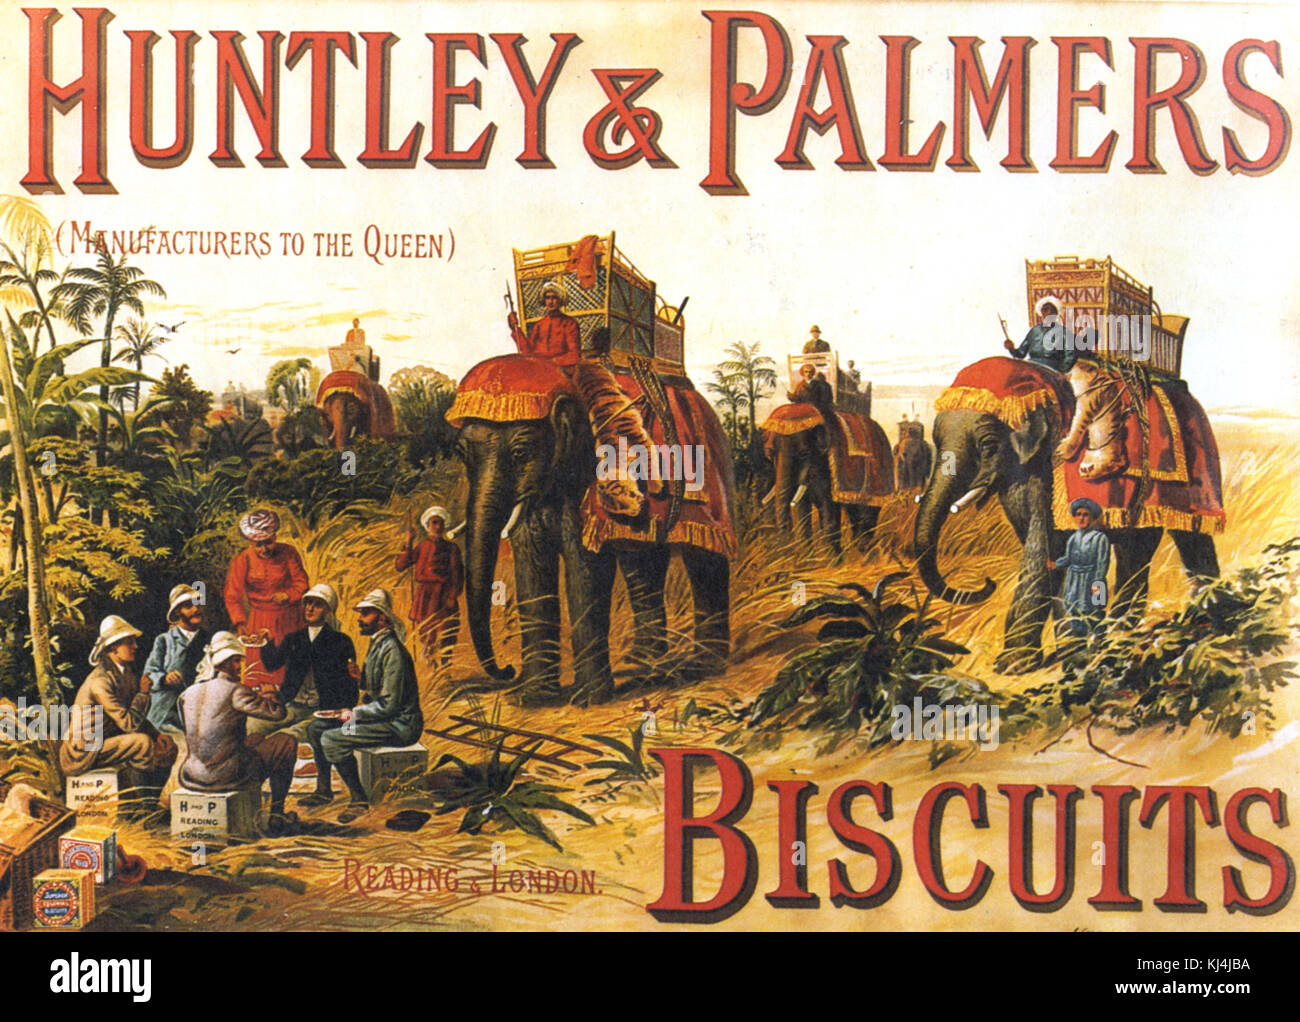 HUNTLEY & PALMERS BISCUITS poster 1894 Stock Photo